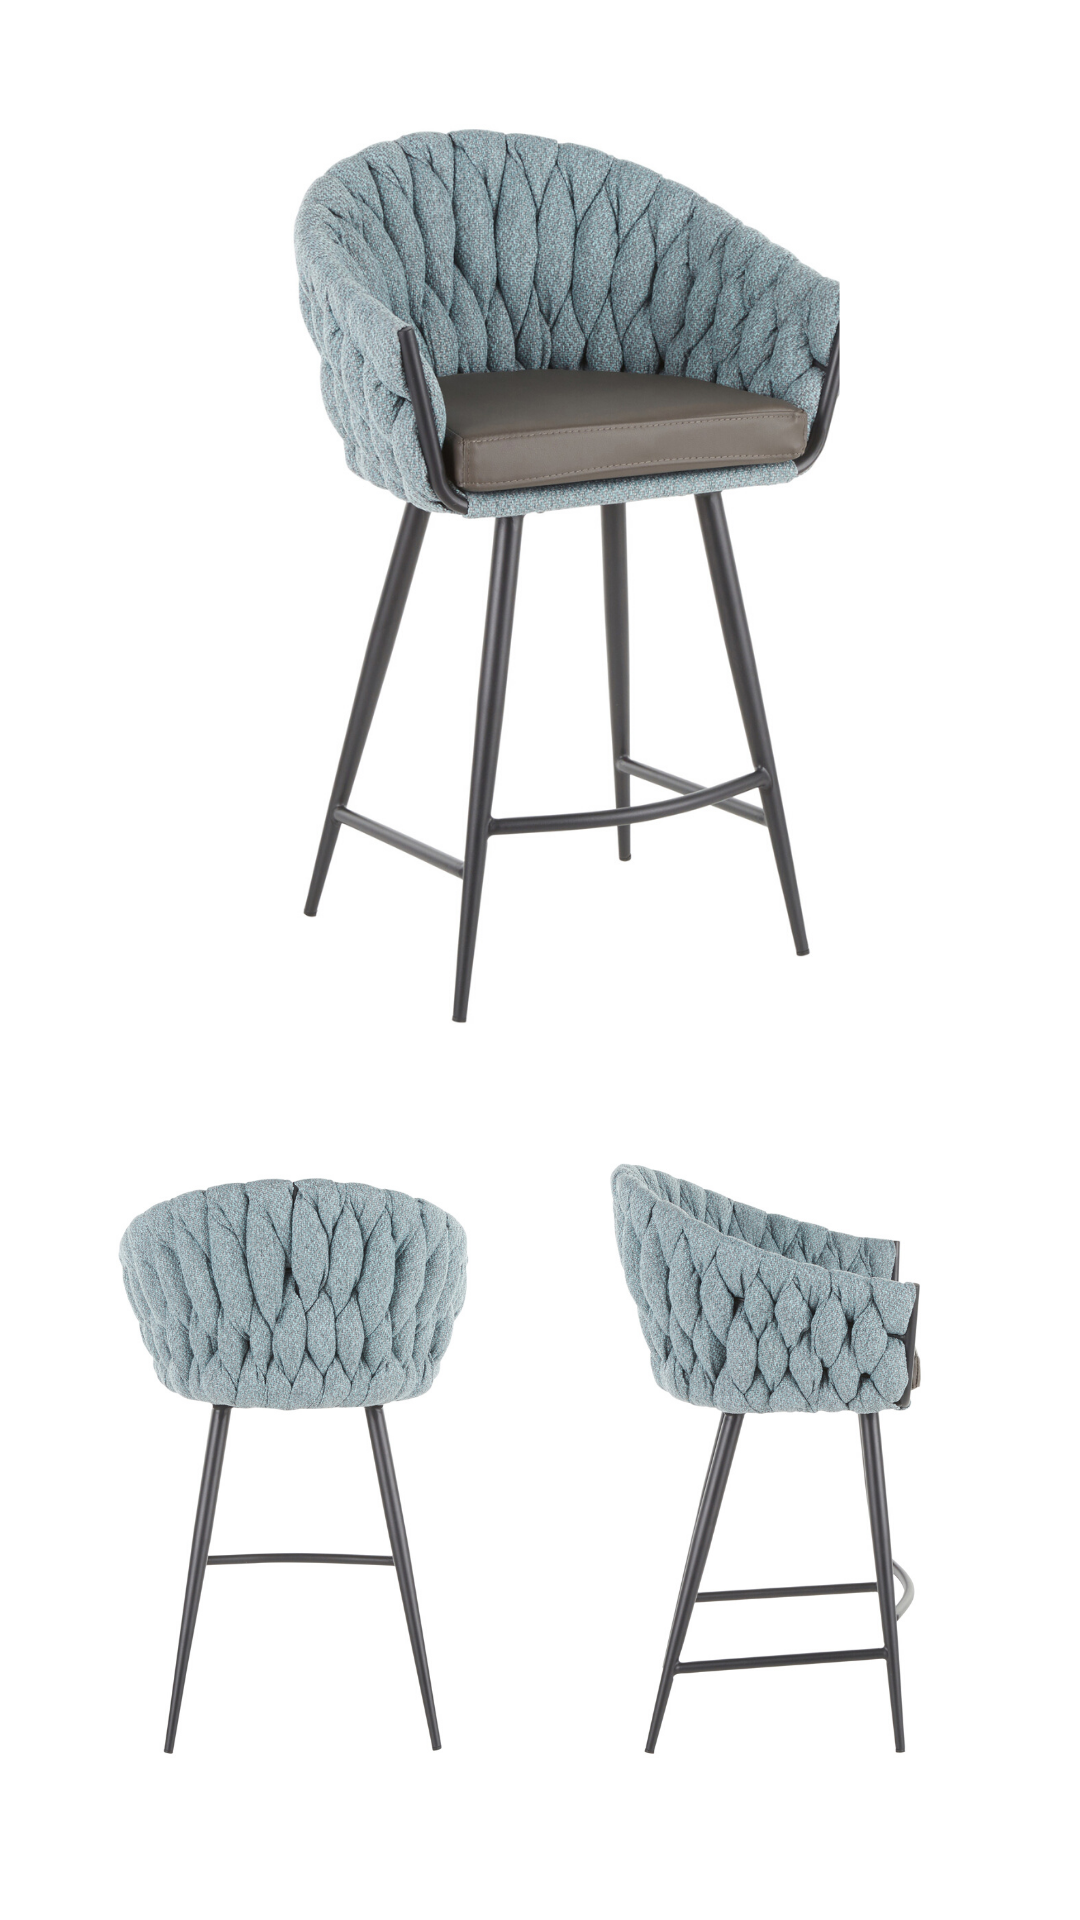 round-up-of-counter-stools-done-right-lumisource-braided-matisse-counter-stool-kathleen-jennison-stockton-california-interior-designer.png